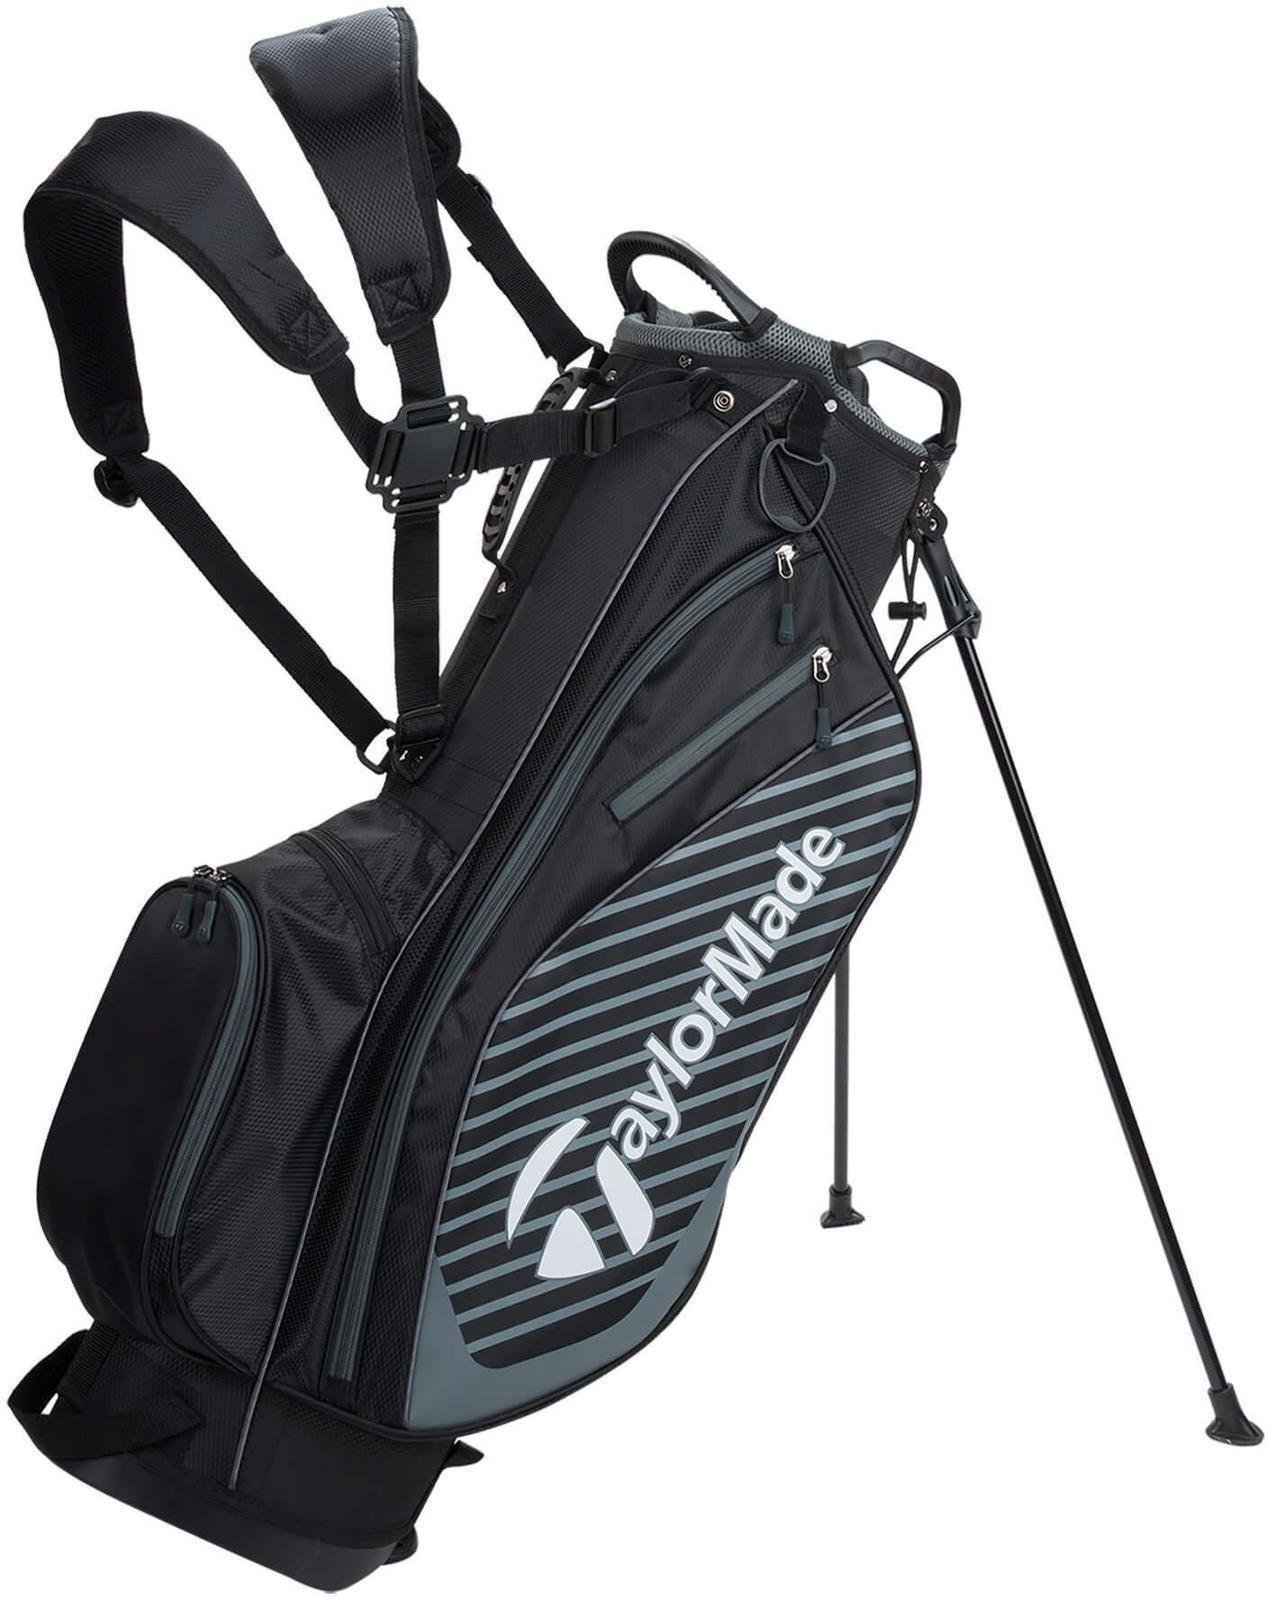 Golfbag TaylorMade Pro 6.0 Black/Charcoal Stand Bag